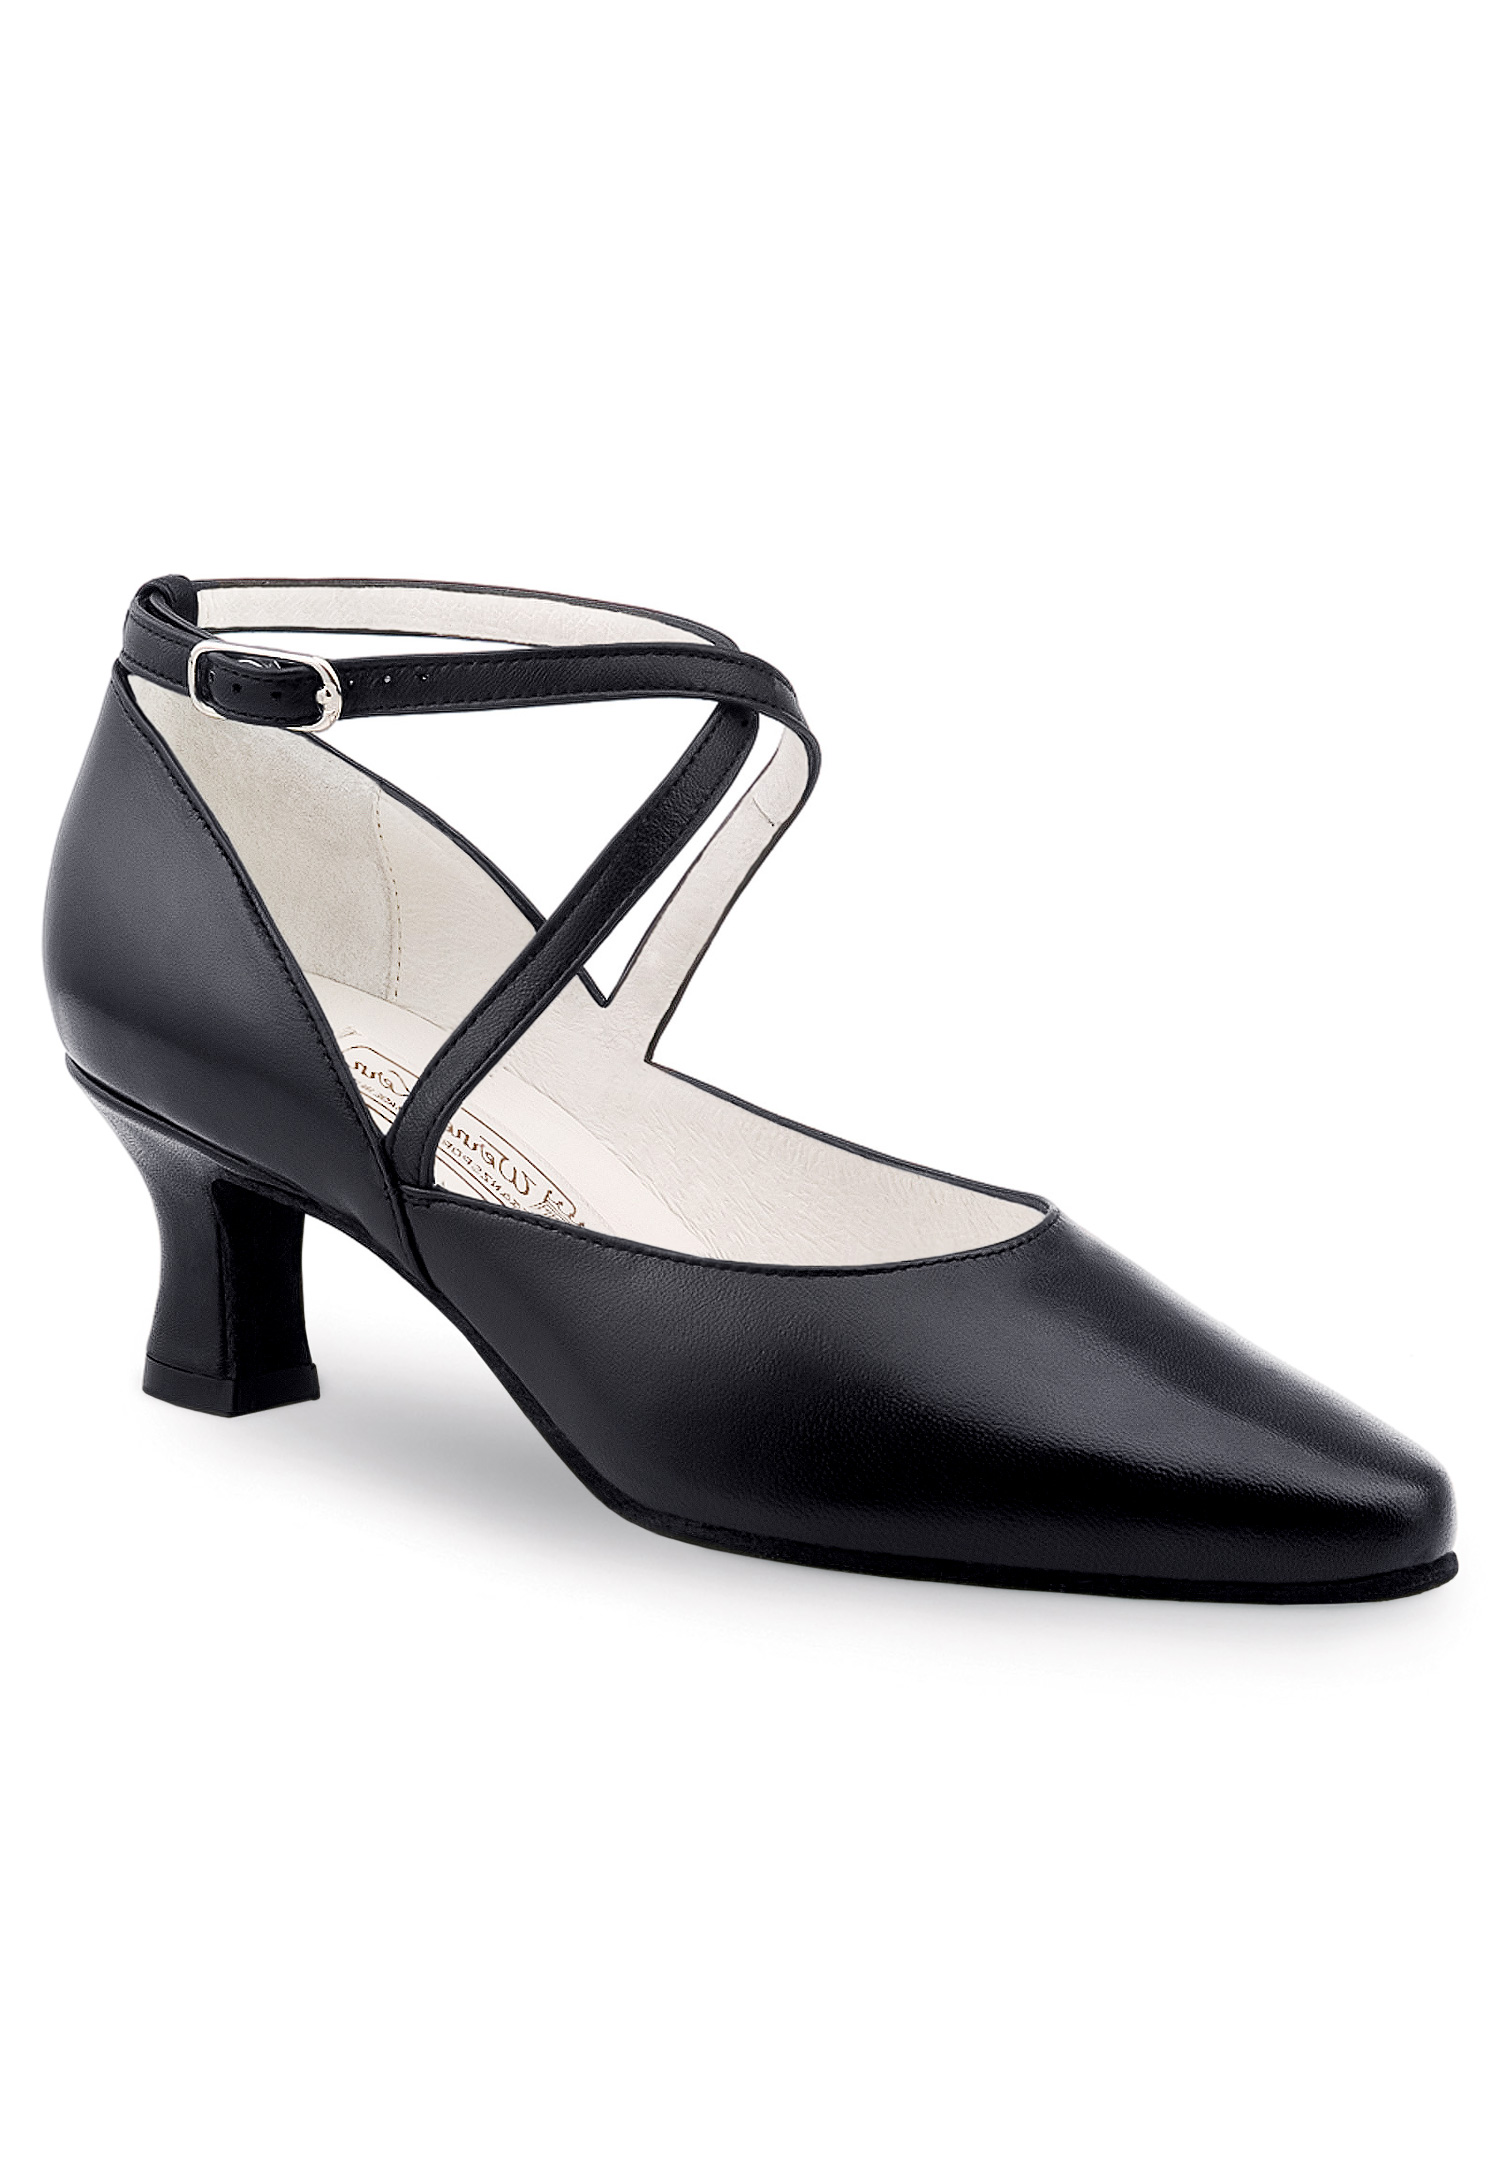 werner kern dance shoes clearance